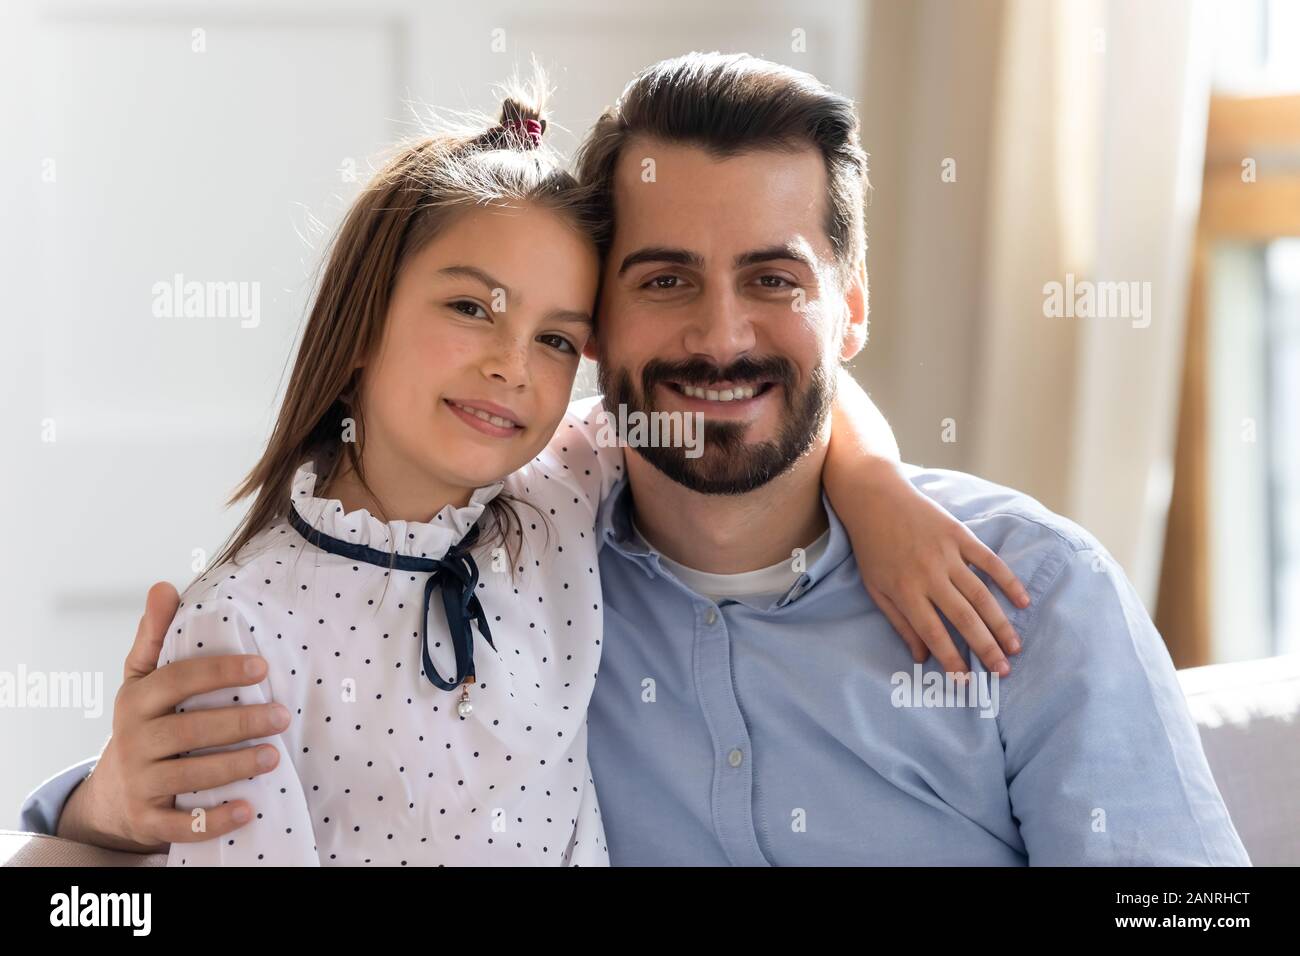 Portrait of happy dad and little daughter hug showing love Stock Photo